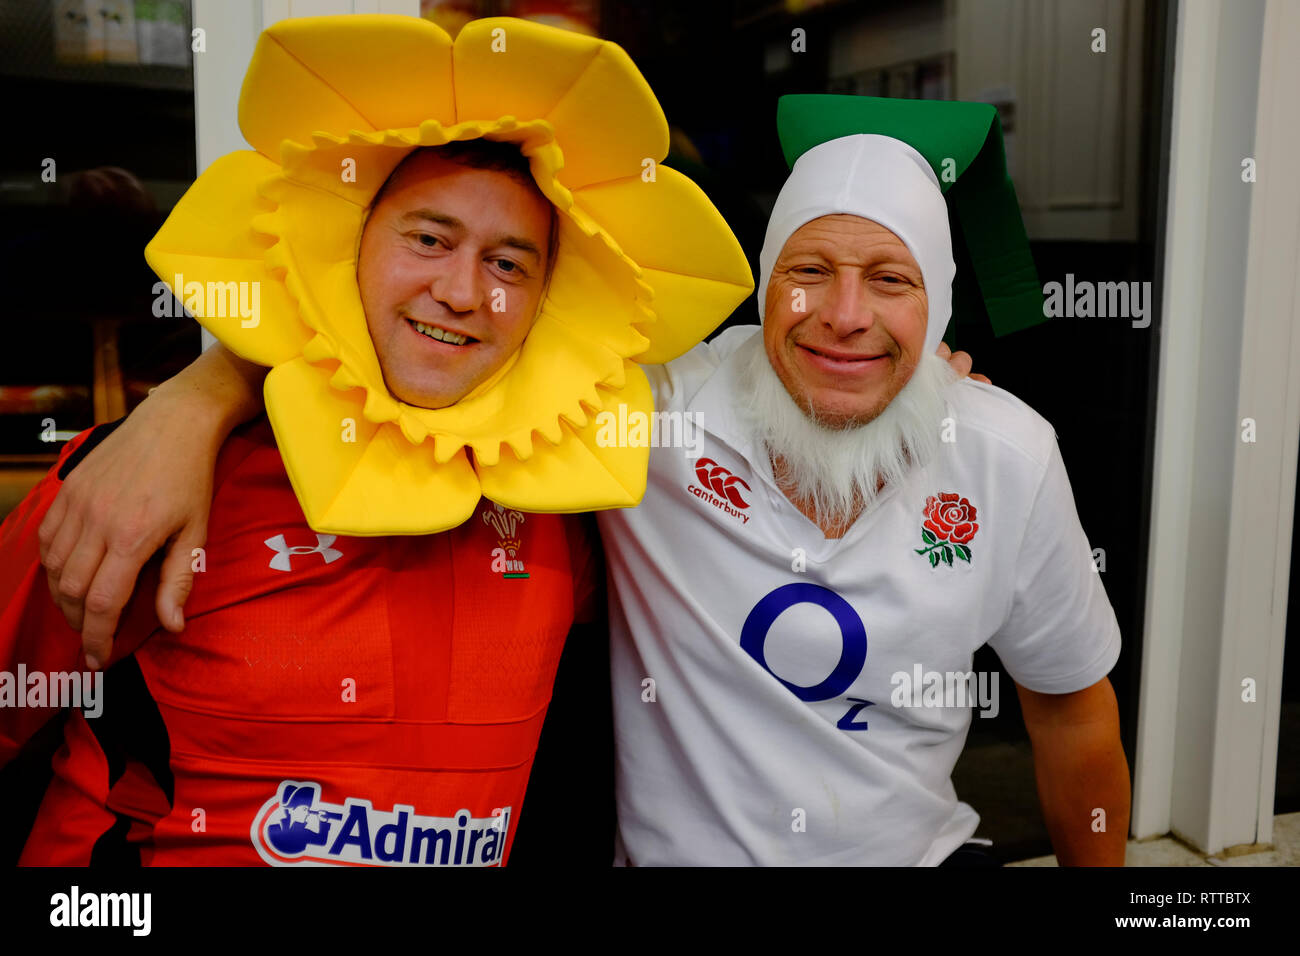 England,Wales,Rugby,supporters,in,takeaway, kebab,shop, dressed,as,daffodil, fancy,dress, Stock Photo